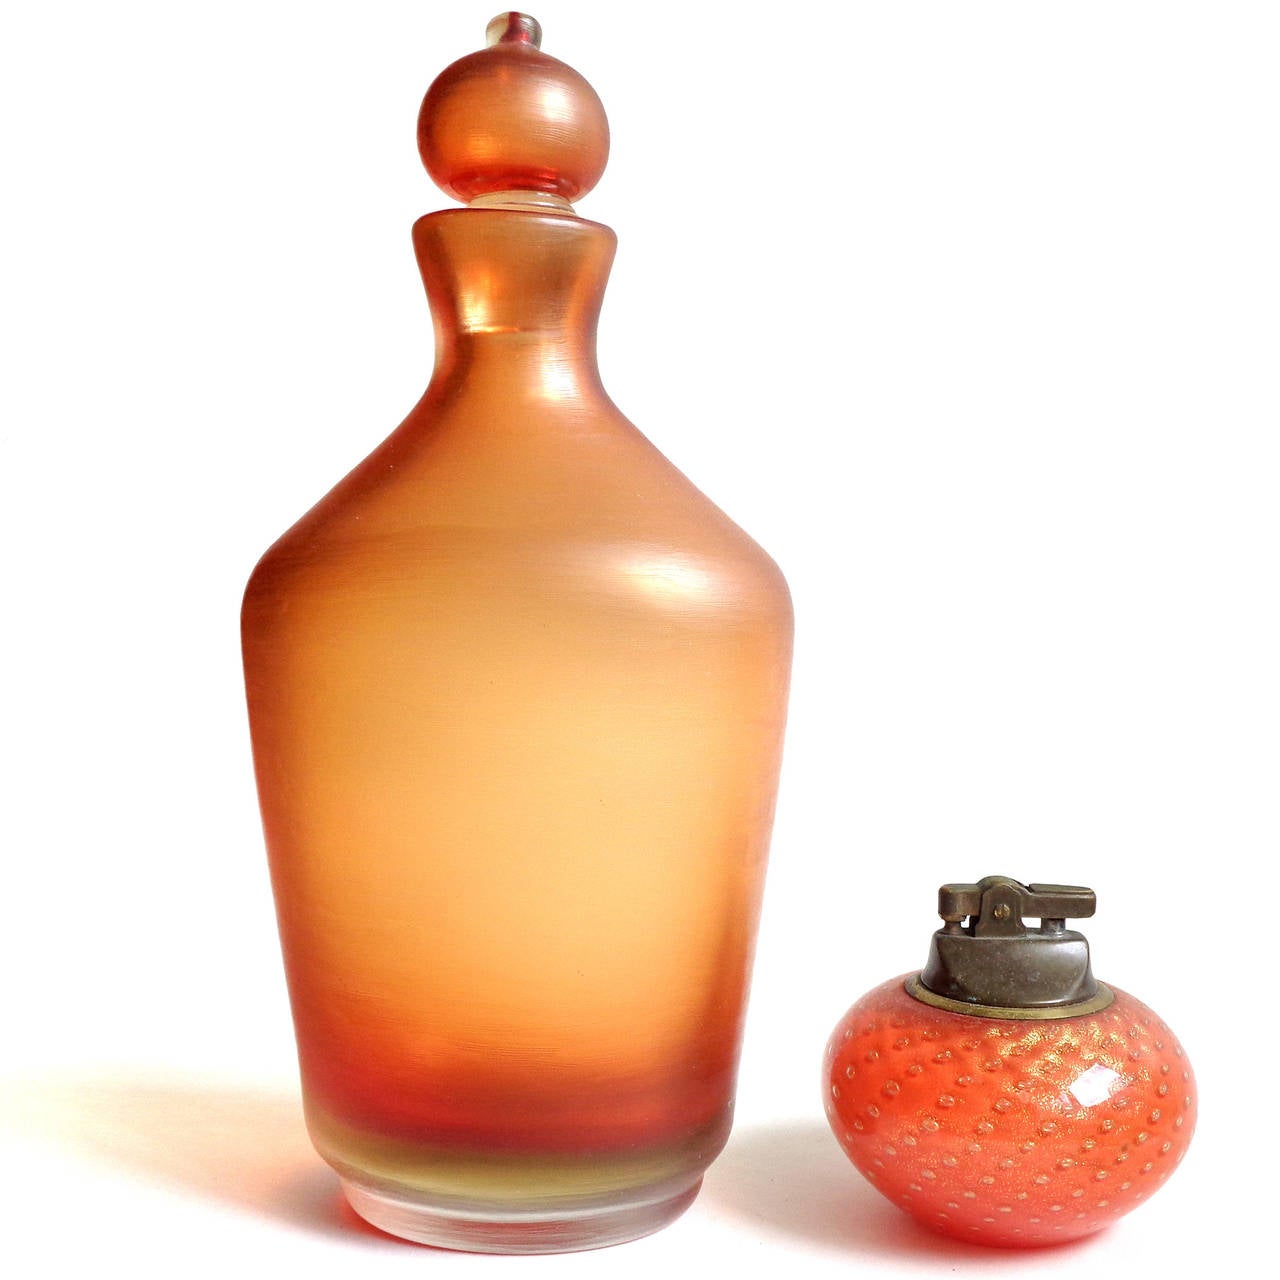 Free shipping worldwide! See details below description.

Incredible Murano handblown fiery orange Sommerso art glass decanter with etched surface. Documented to designer Paolo Venini for the Venini company, in the 